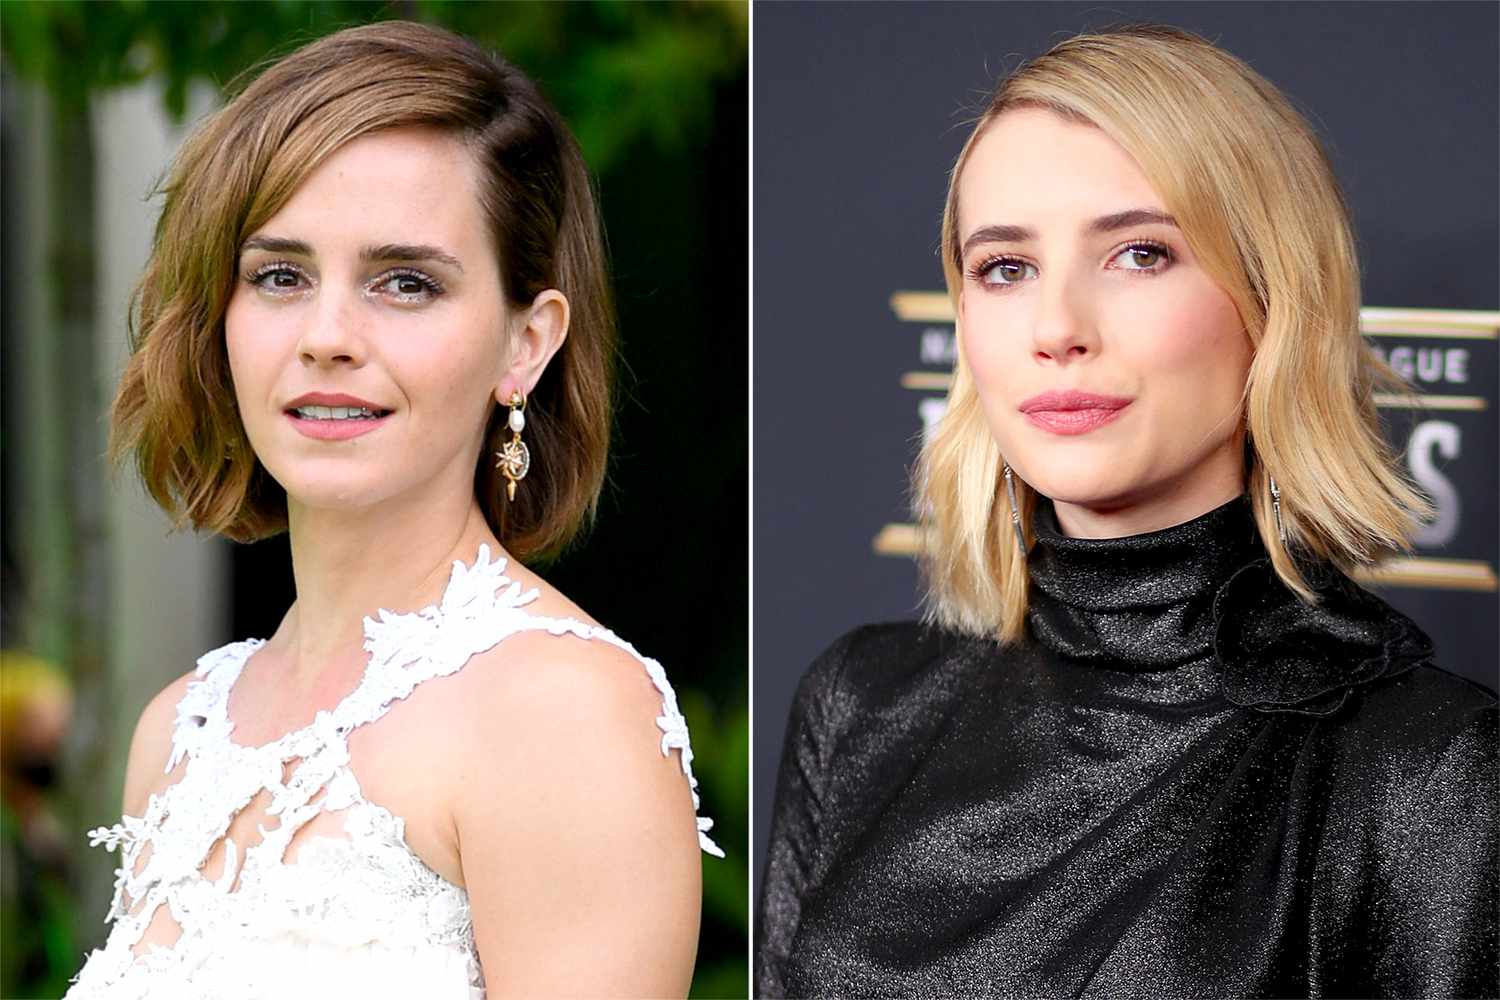 Emma Watson and Emma Roberts have a laugh over their 'Return to Hogwarts' photo mix-up